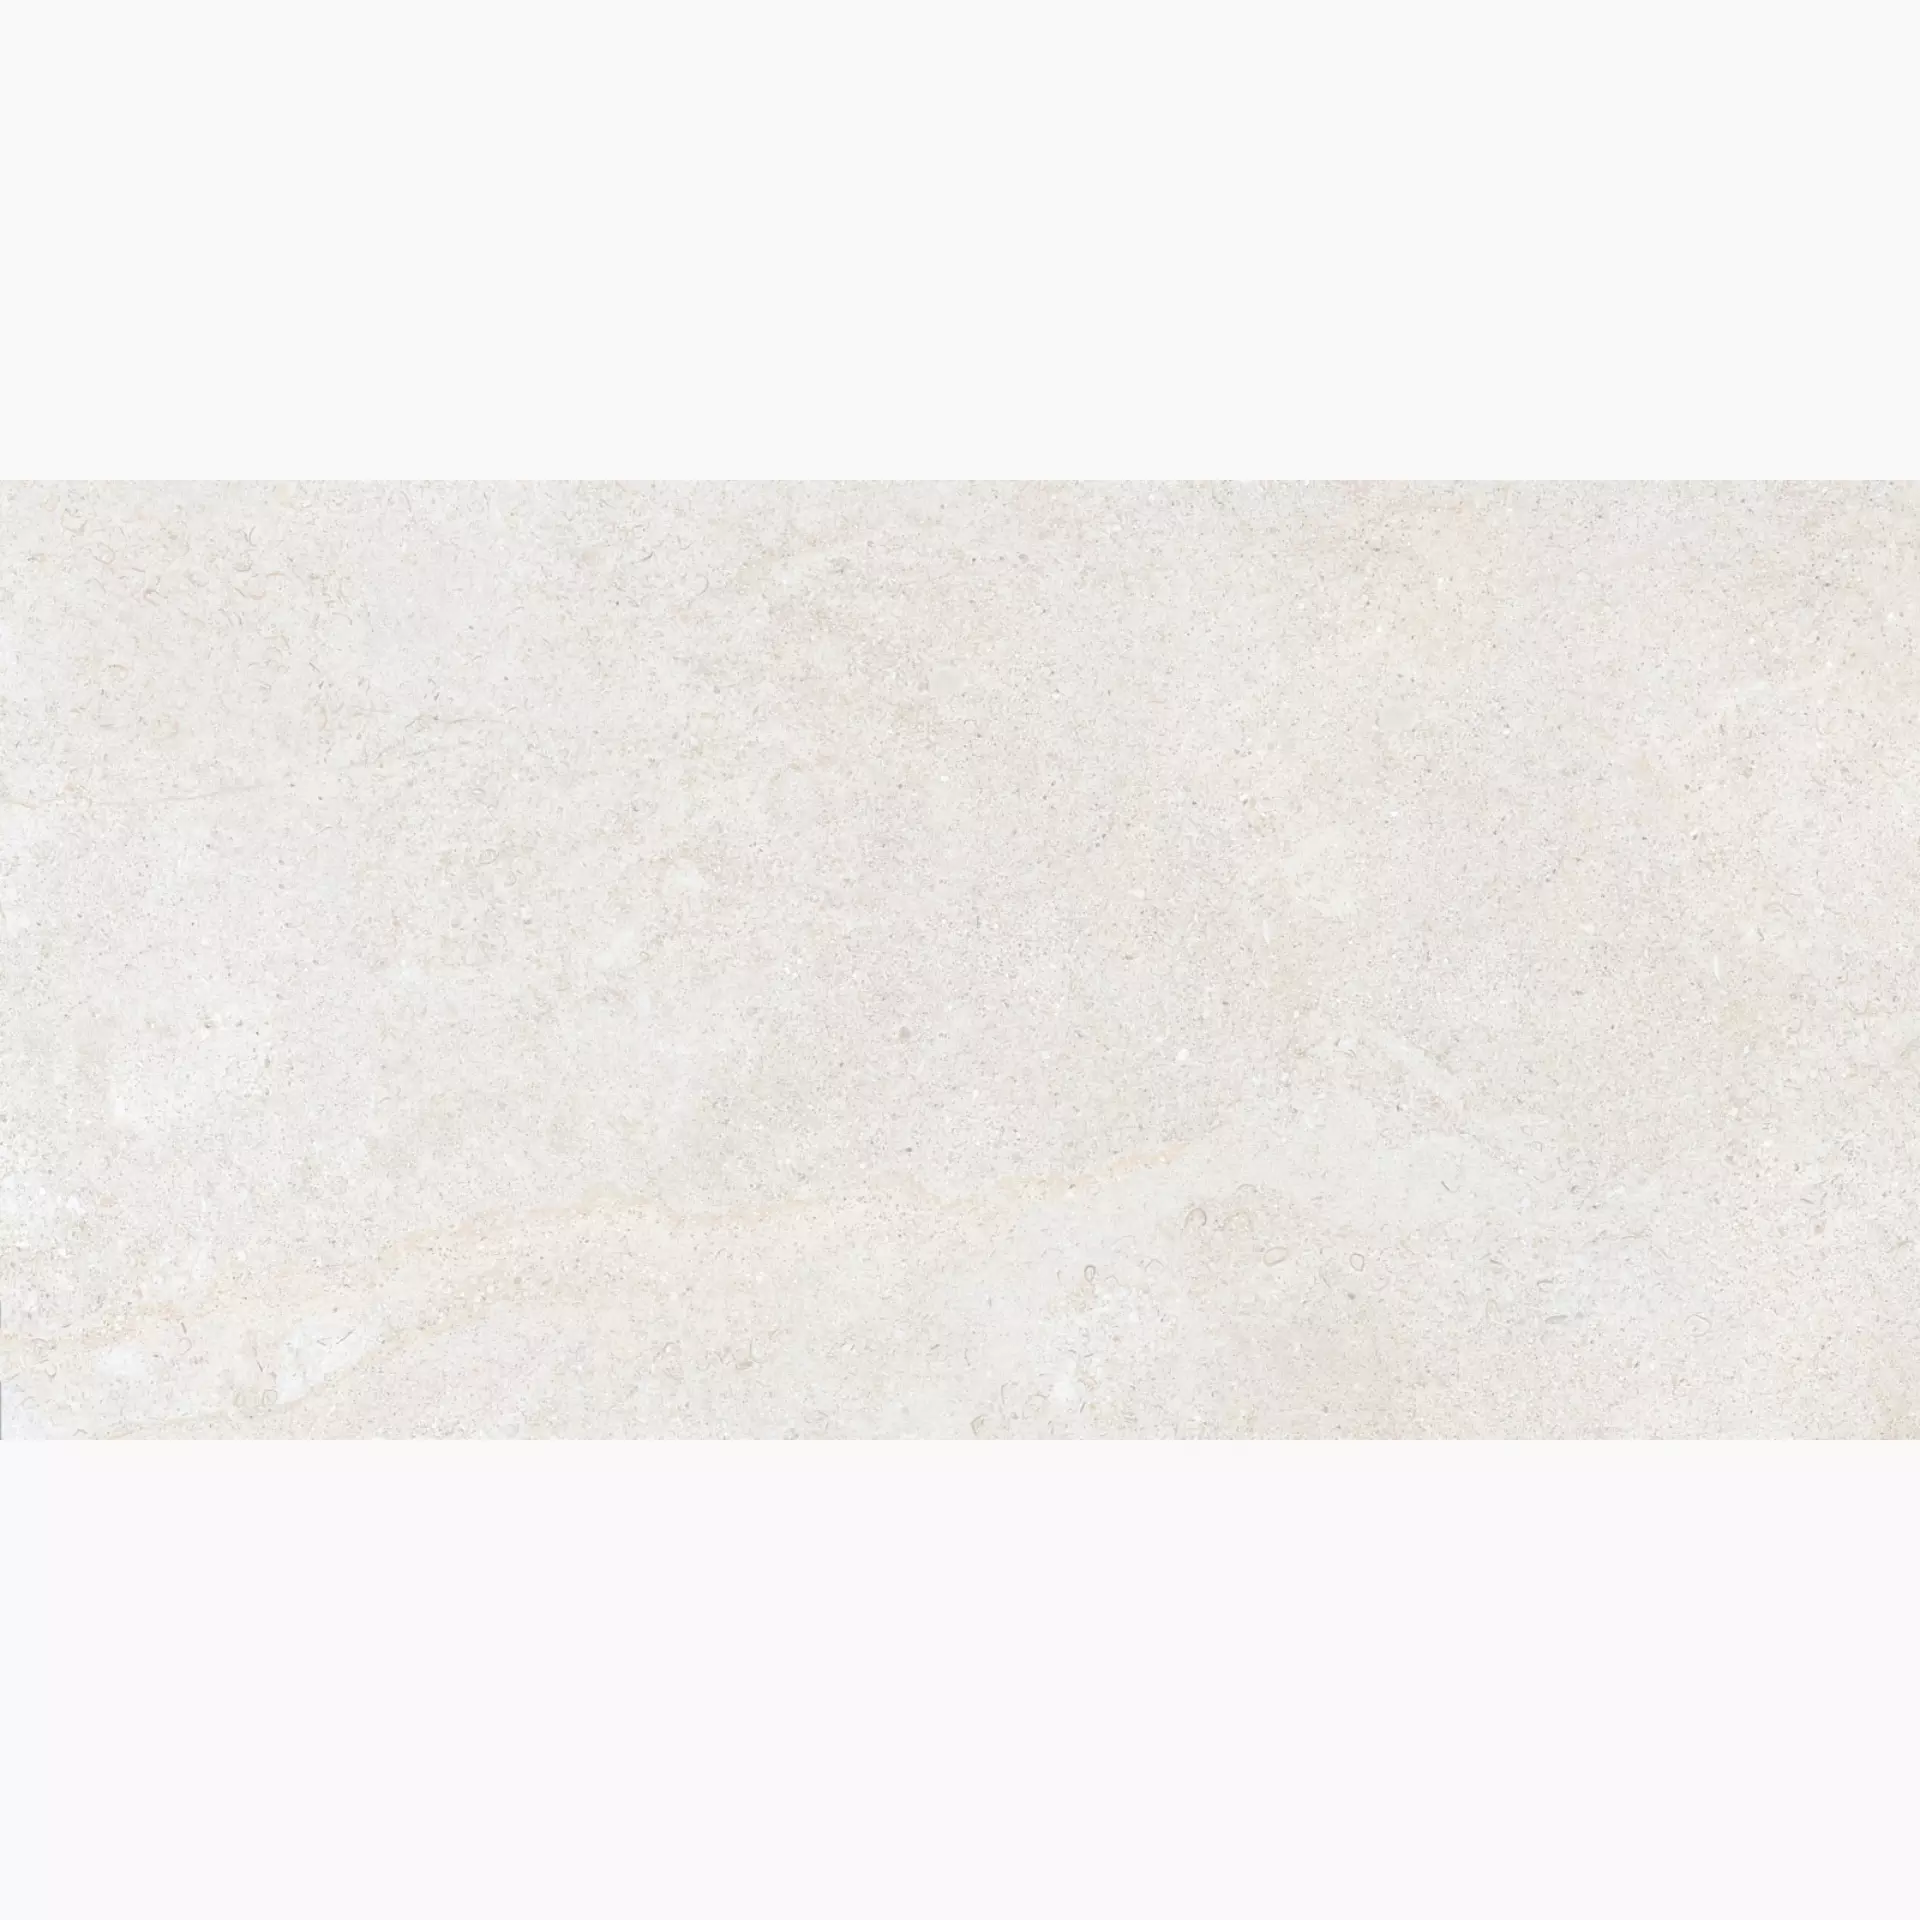 Keope Brystone White Strutturato 44593544 60x120cm rectified 9mm